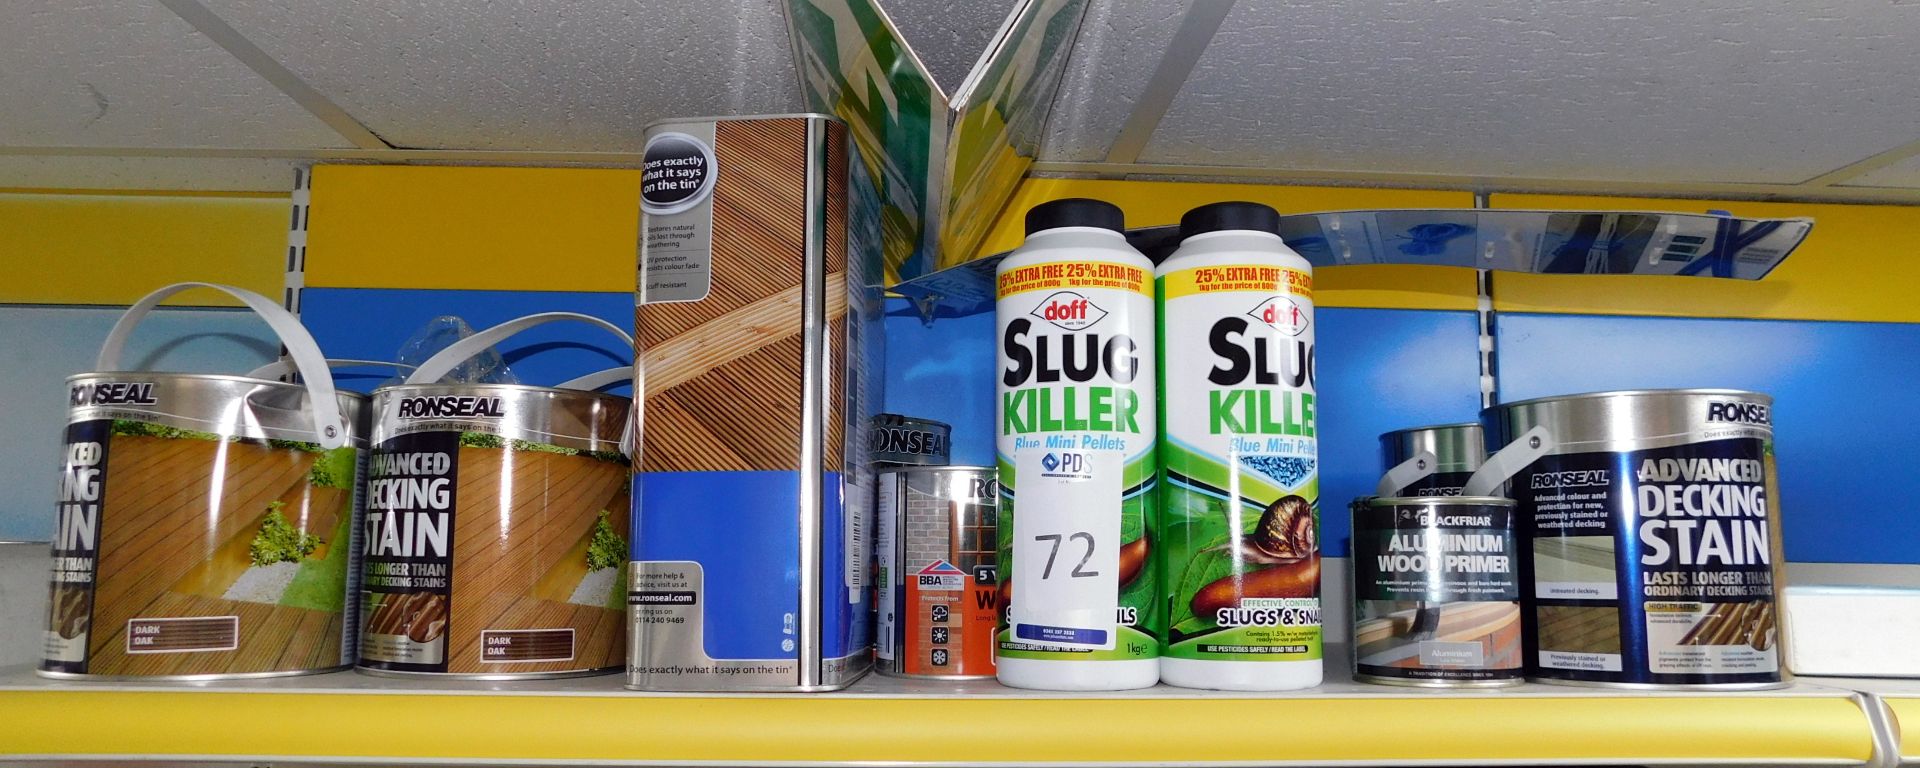 Contents of Shelf to Include Decking Stain & Slug Killer (Located Spelmonden, Kent – See General